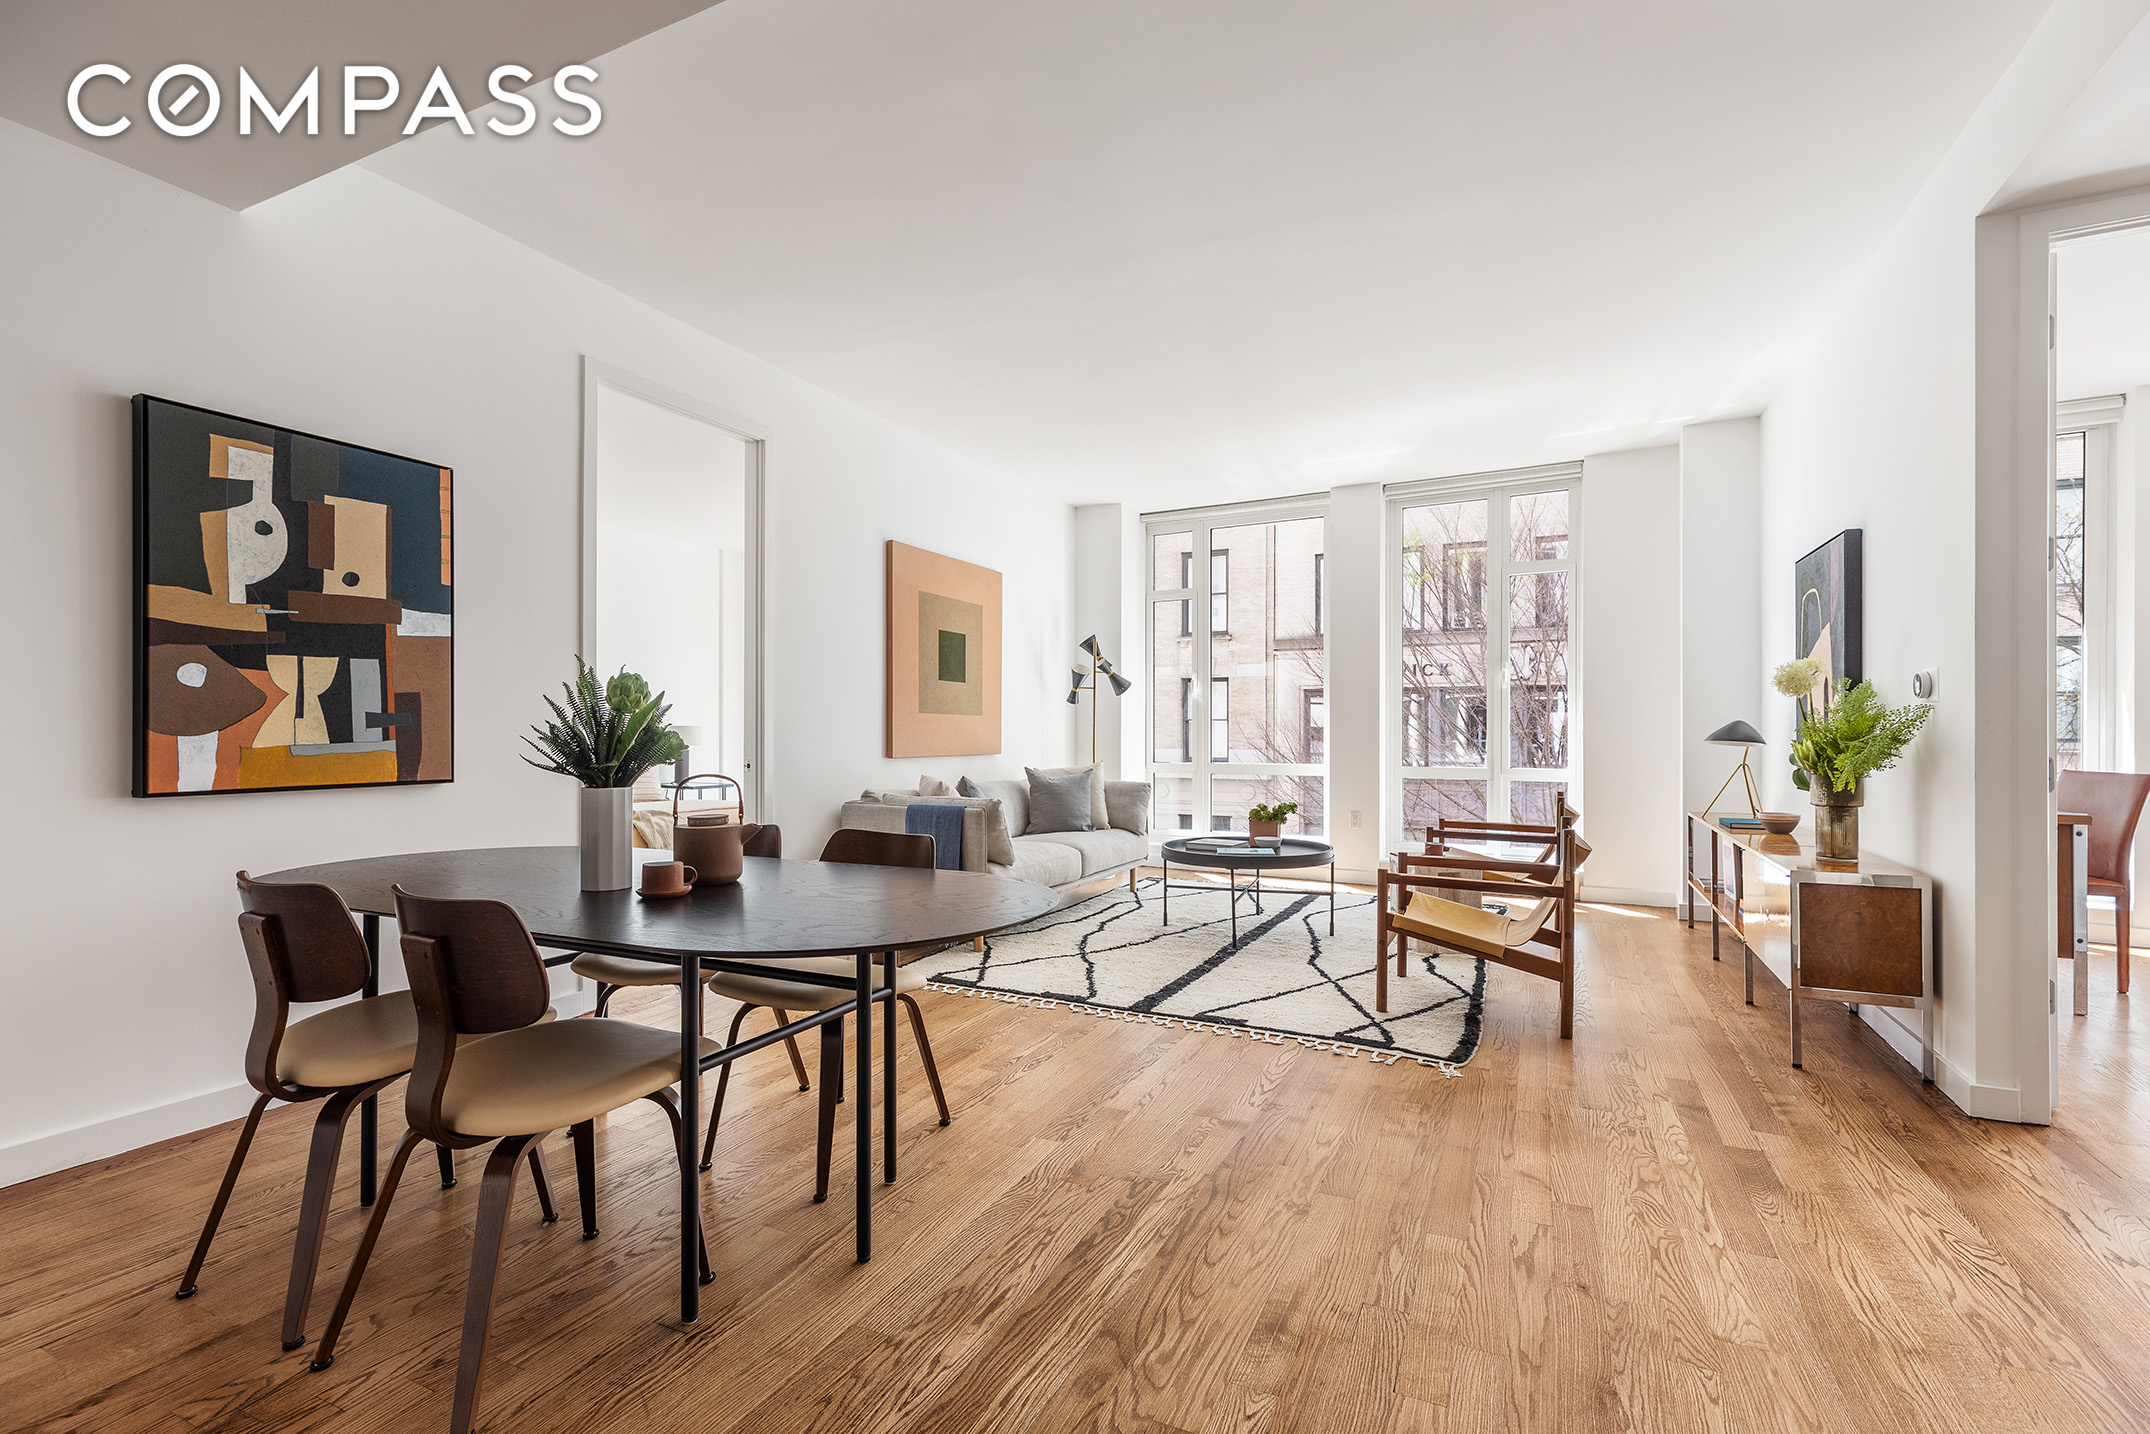 133 West 22nd Street 4B, Chelsea, Downtown, NYC - 2 Bedrooms  
2 Bathrooms  
4 Rooms - 